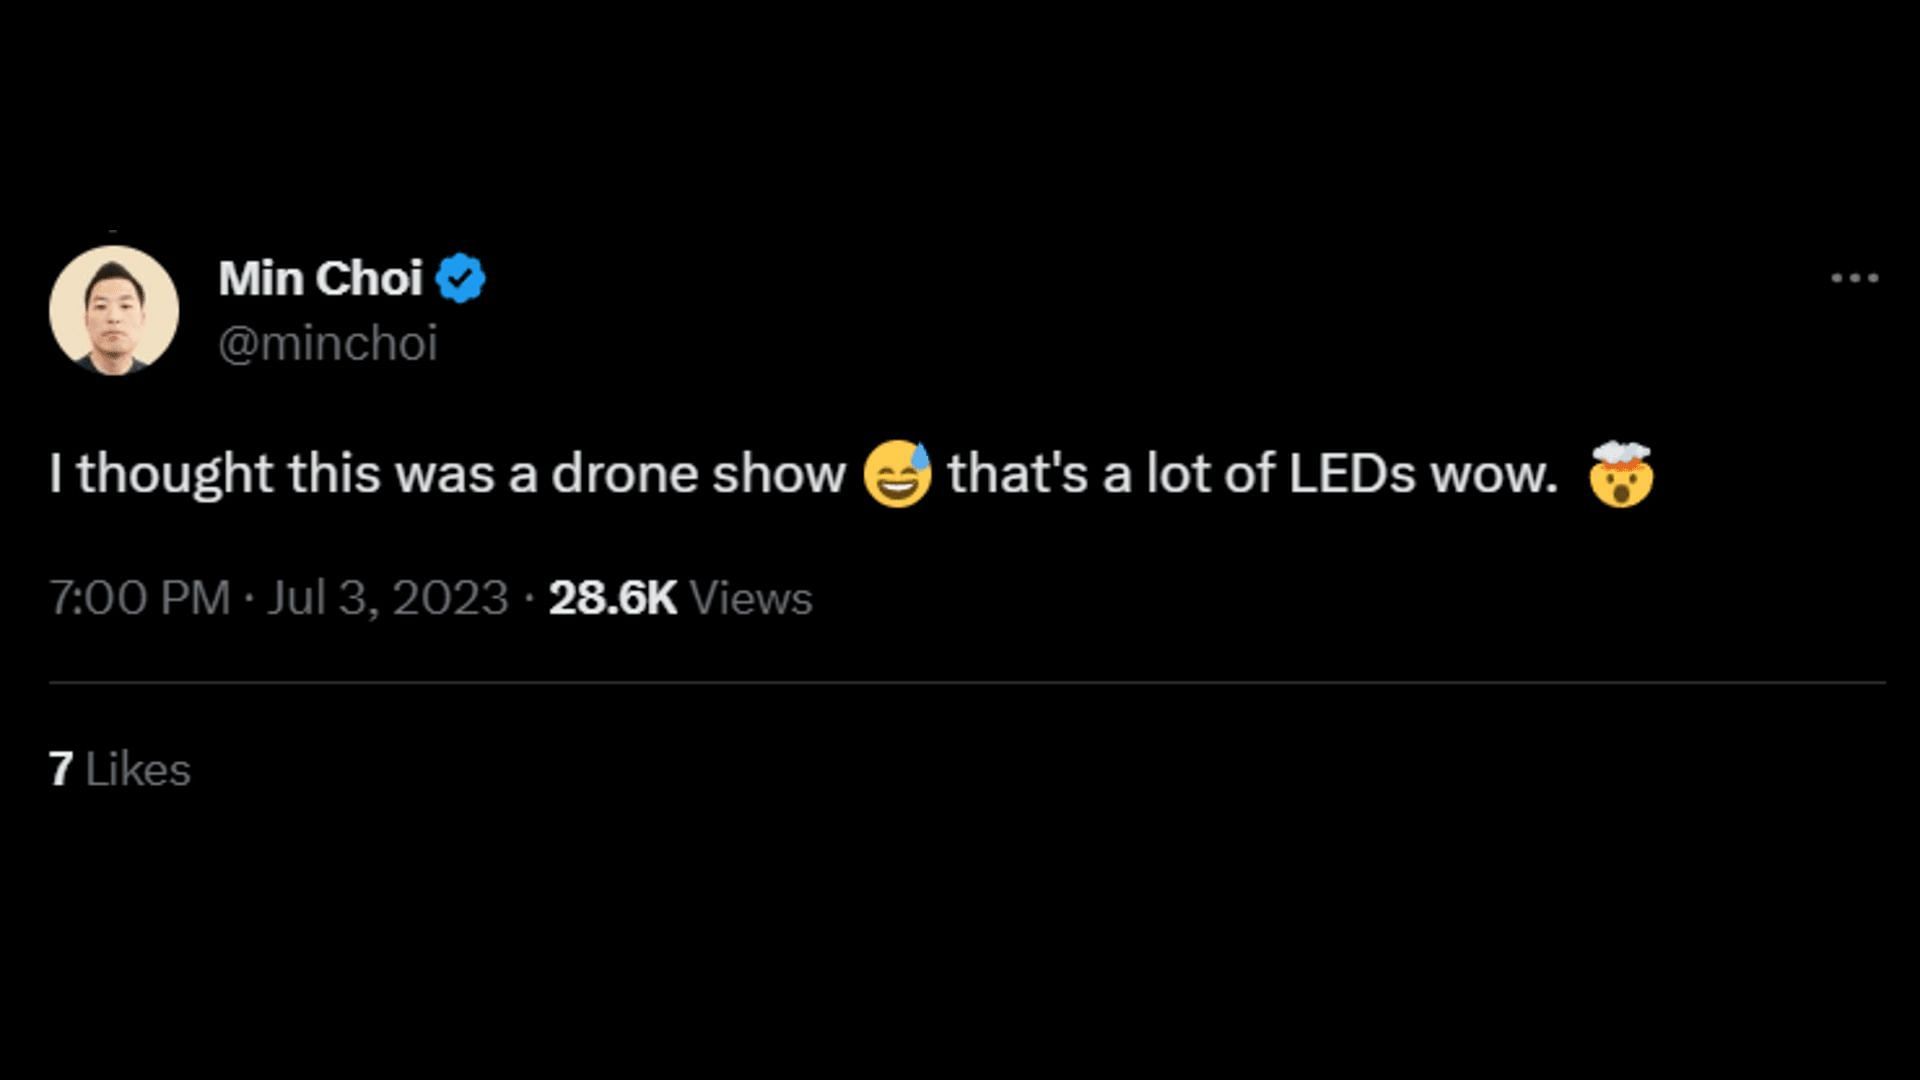 A tweet compares the LED trial run of The Sphere to a drone show. (Image via Twitter/Min Choi)